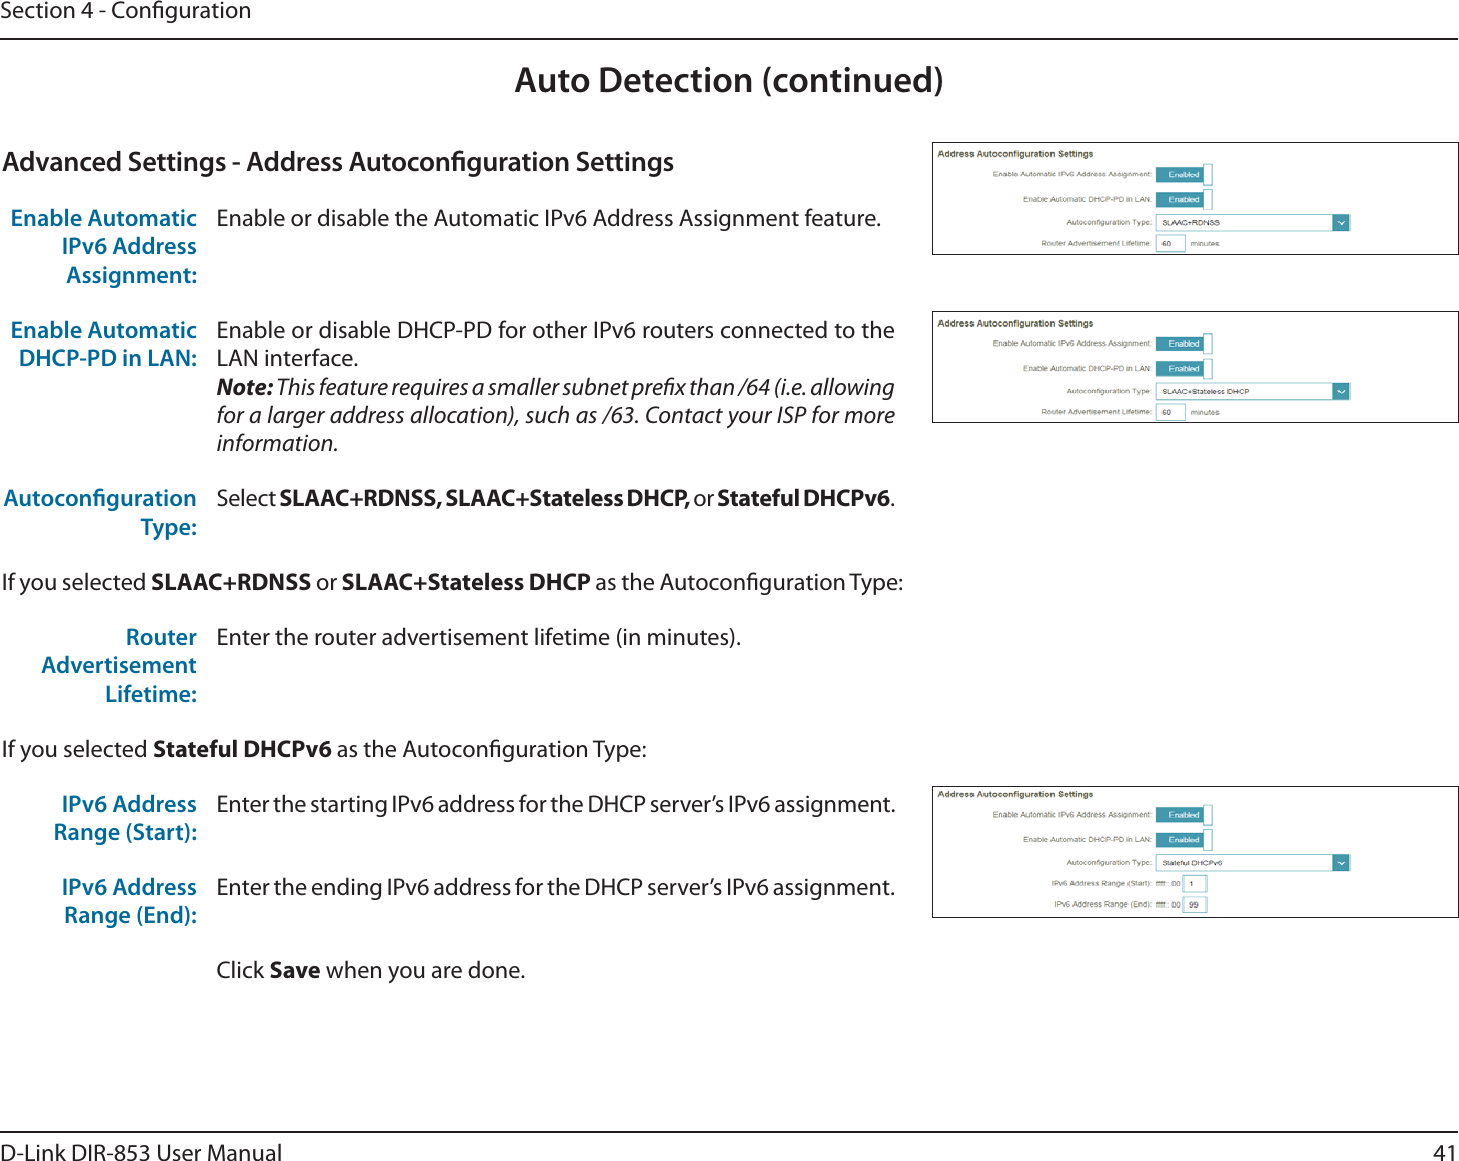 41D-Link DIR-853 User ManualSection 4 - CongurationAuto Detection (continued)Advanced Settings - Address Autoconguration SettingsEnable Automatic IPv6 Address Assignment:Enable or disable the Automatic IPv6 Address Assignment feature.Enable Automatic DHCP-PD in LAN:Enable or disable DHCP-PD for other IPv6 routers connected to the LAN interface.Note: This feature requires a smaller subnet prex than /64 (i.e. allowing for a larger address allocation), such as /63. Contact your ISP for more information.Autoconguration Type:Select SLAAC+RDNSS, SLAAC+Stateless DHCP, or Stateful DHCPv6.If you selected SLAAC+RDNSS or SLAAC+Stateless DHCP as the Autoconguration Type:Router Advertisement Lifetime:Enter the router advertisement lifetime (in minutes).If you selected Stateful DHCPv6 as the Autoconguration Type:IPv6 Address Range (Start):Enter the starting IPv6 address for the DHCP server’s IPv6 assignment.IPv6 Address Range (End):Enter the ending IPv6 address for the DHCP server’s IPv6 assignment.Click Save when you are done.